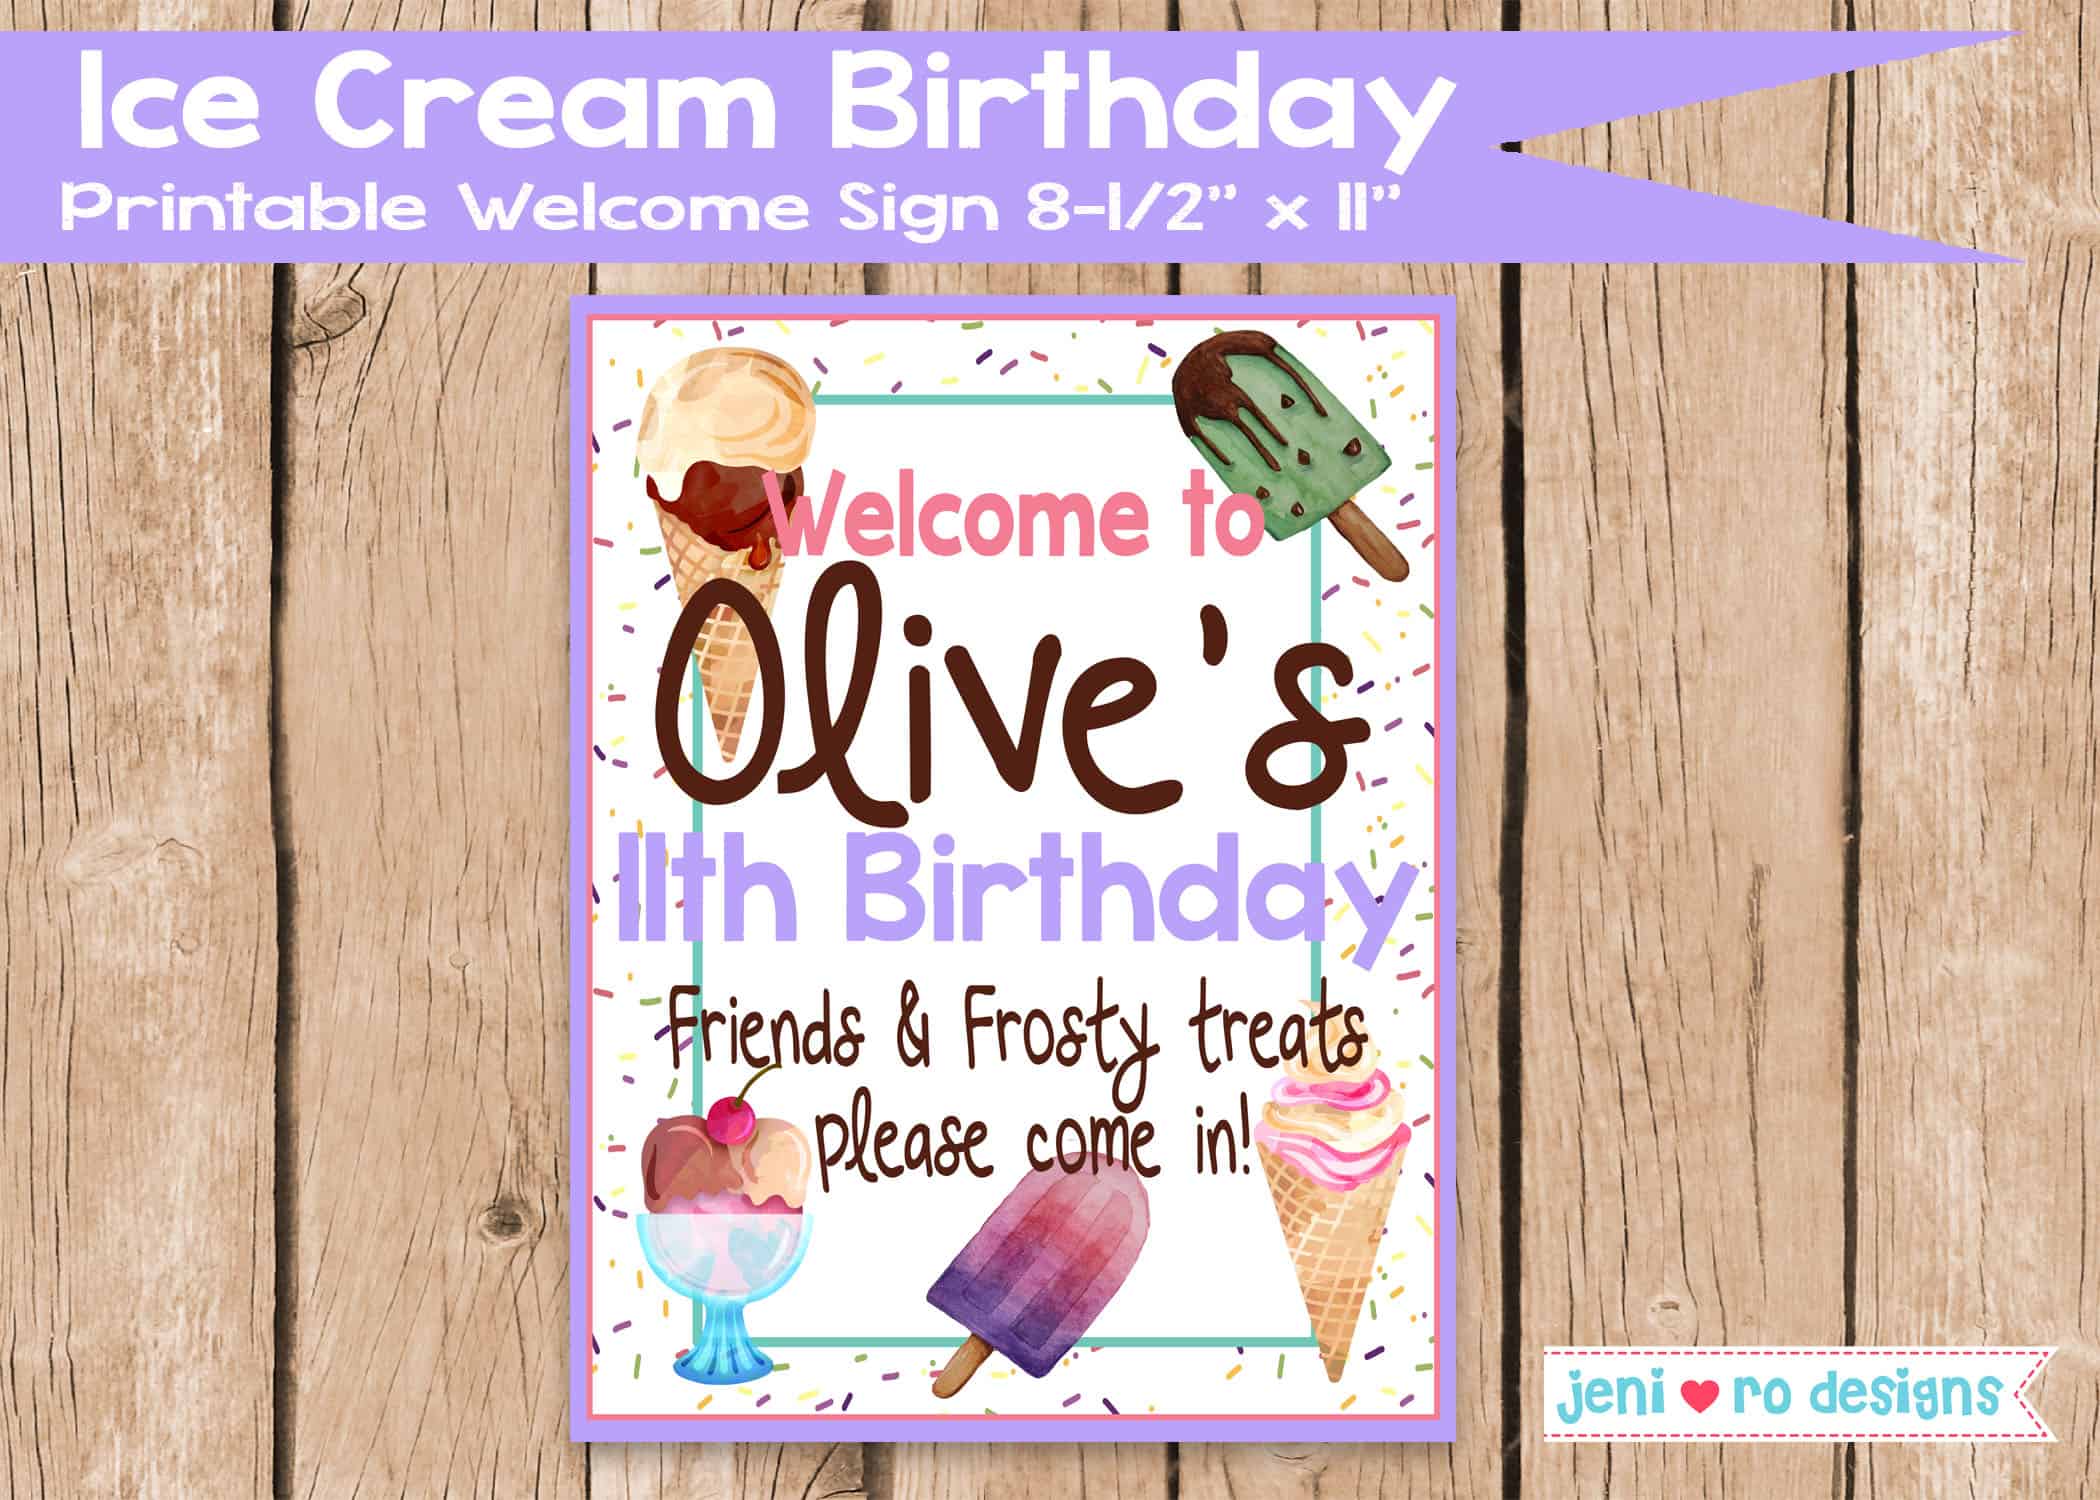 Ice Cream Printable Party Package